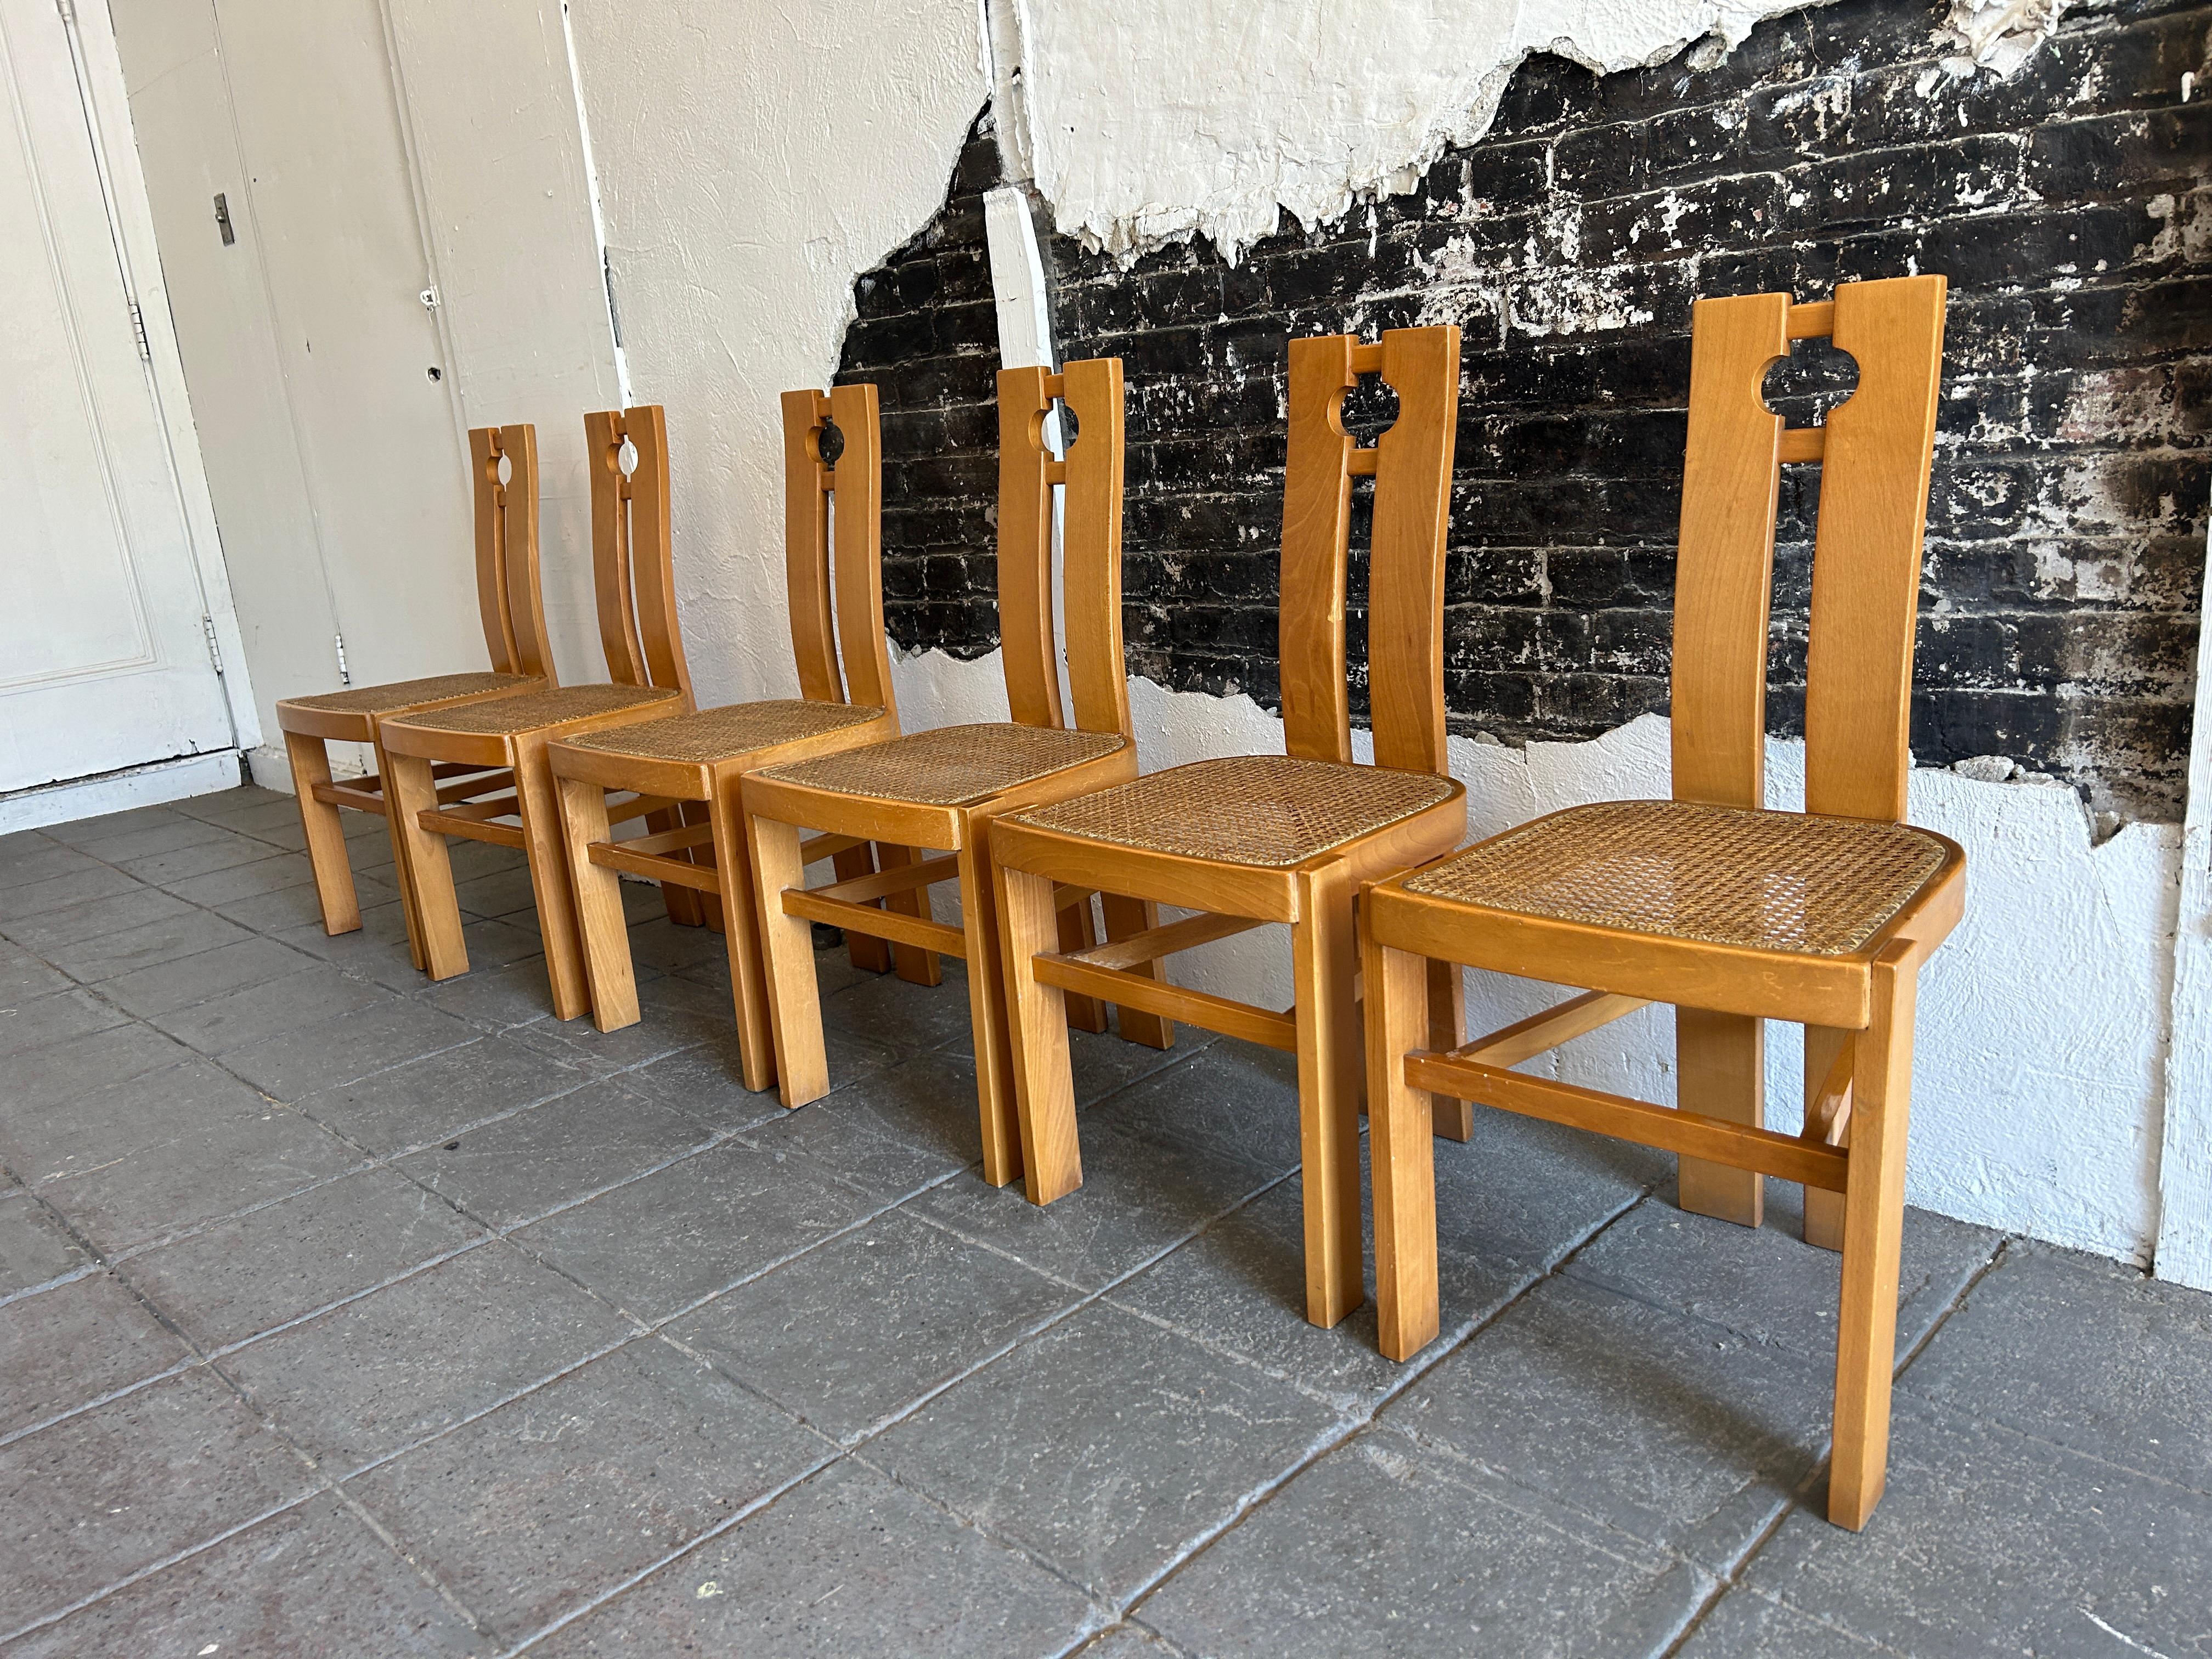 Amazing Set of 6 midcentury Post Modern Dining Chairs by Italian Designer Pietro Costantini. Very delicate Post Modern Designed Blonde Birch dining chairs with cane Seats. All chairs are ready for use. show normal wear from use. Made in Italy.